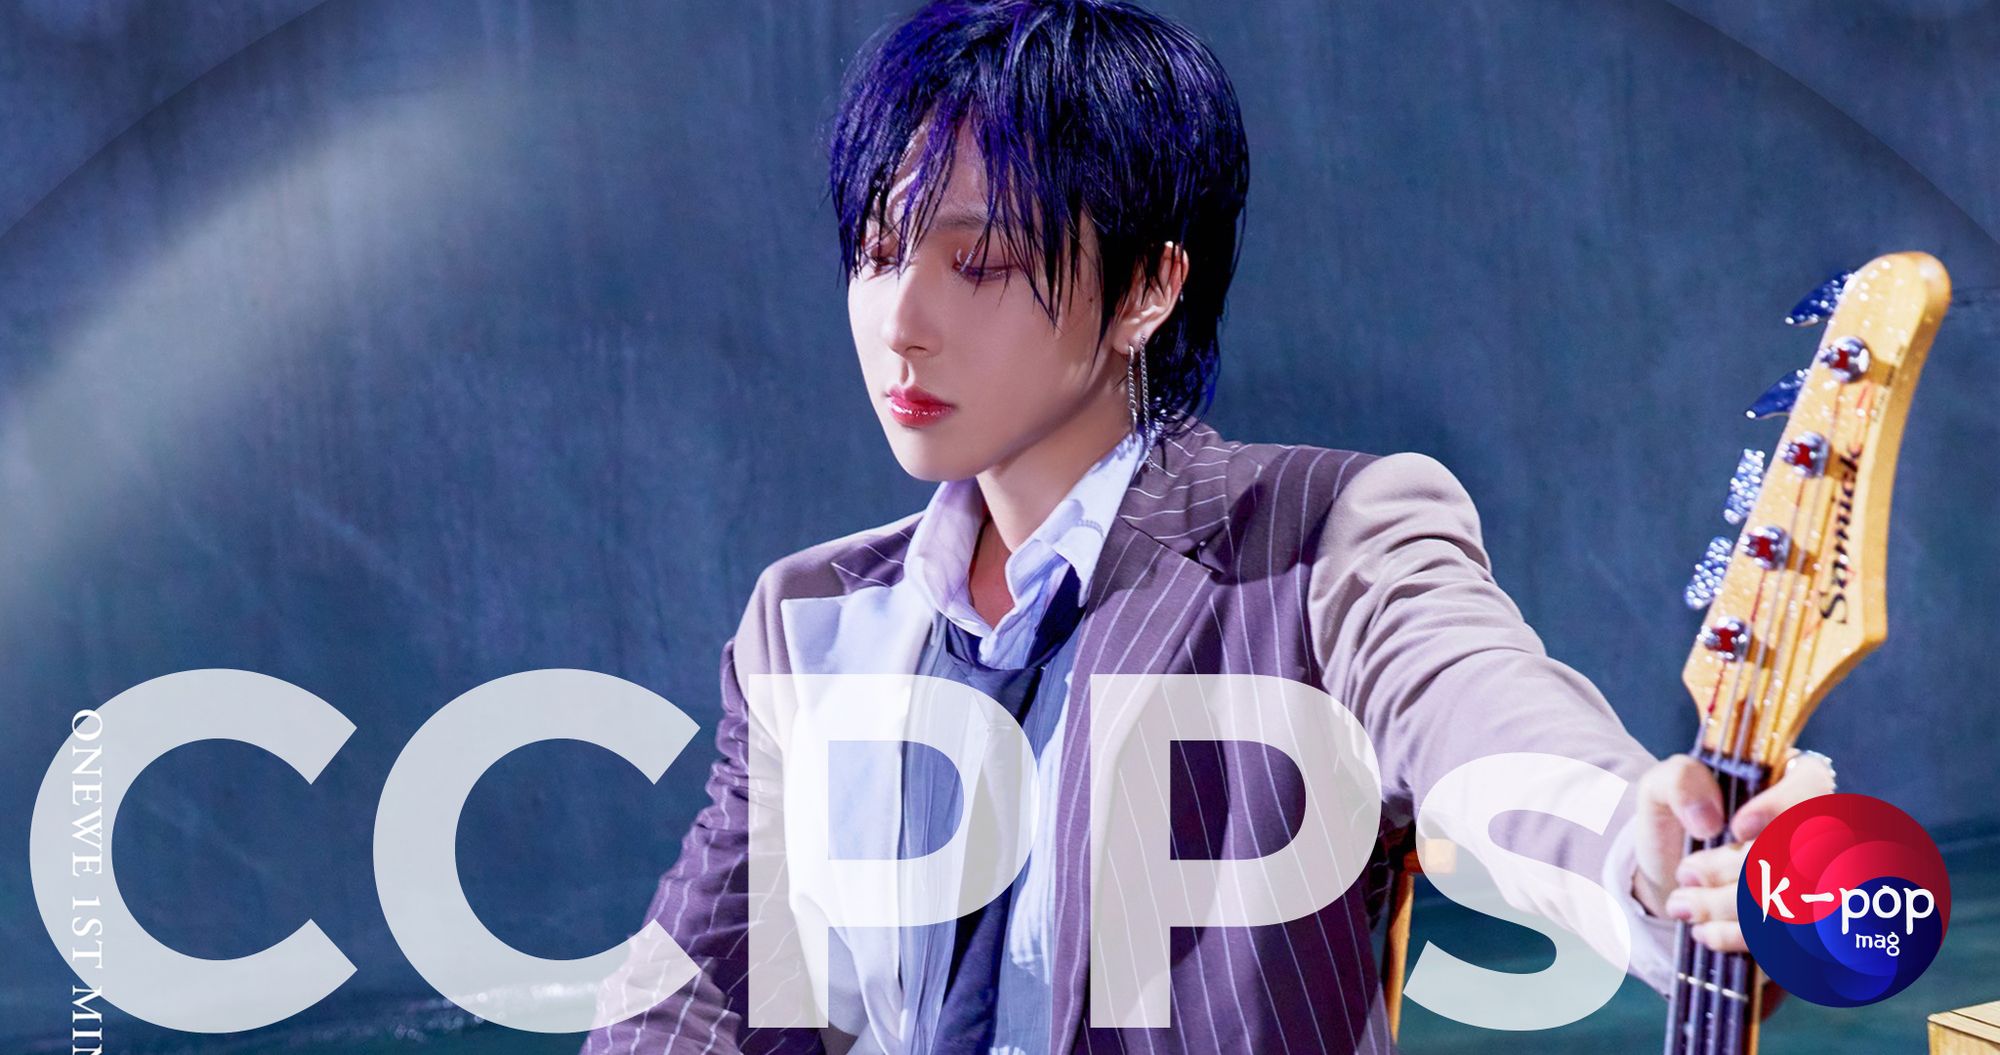 ONEWE [PLANET NINE : ALTER EGO] CONCEPT PHOTOS (HD)